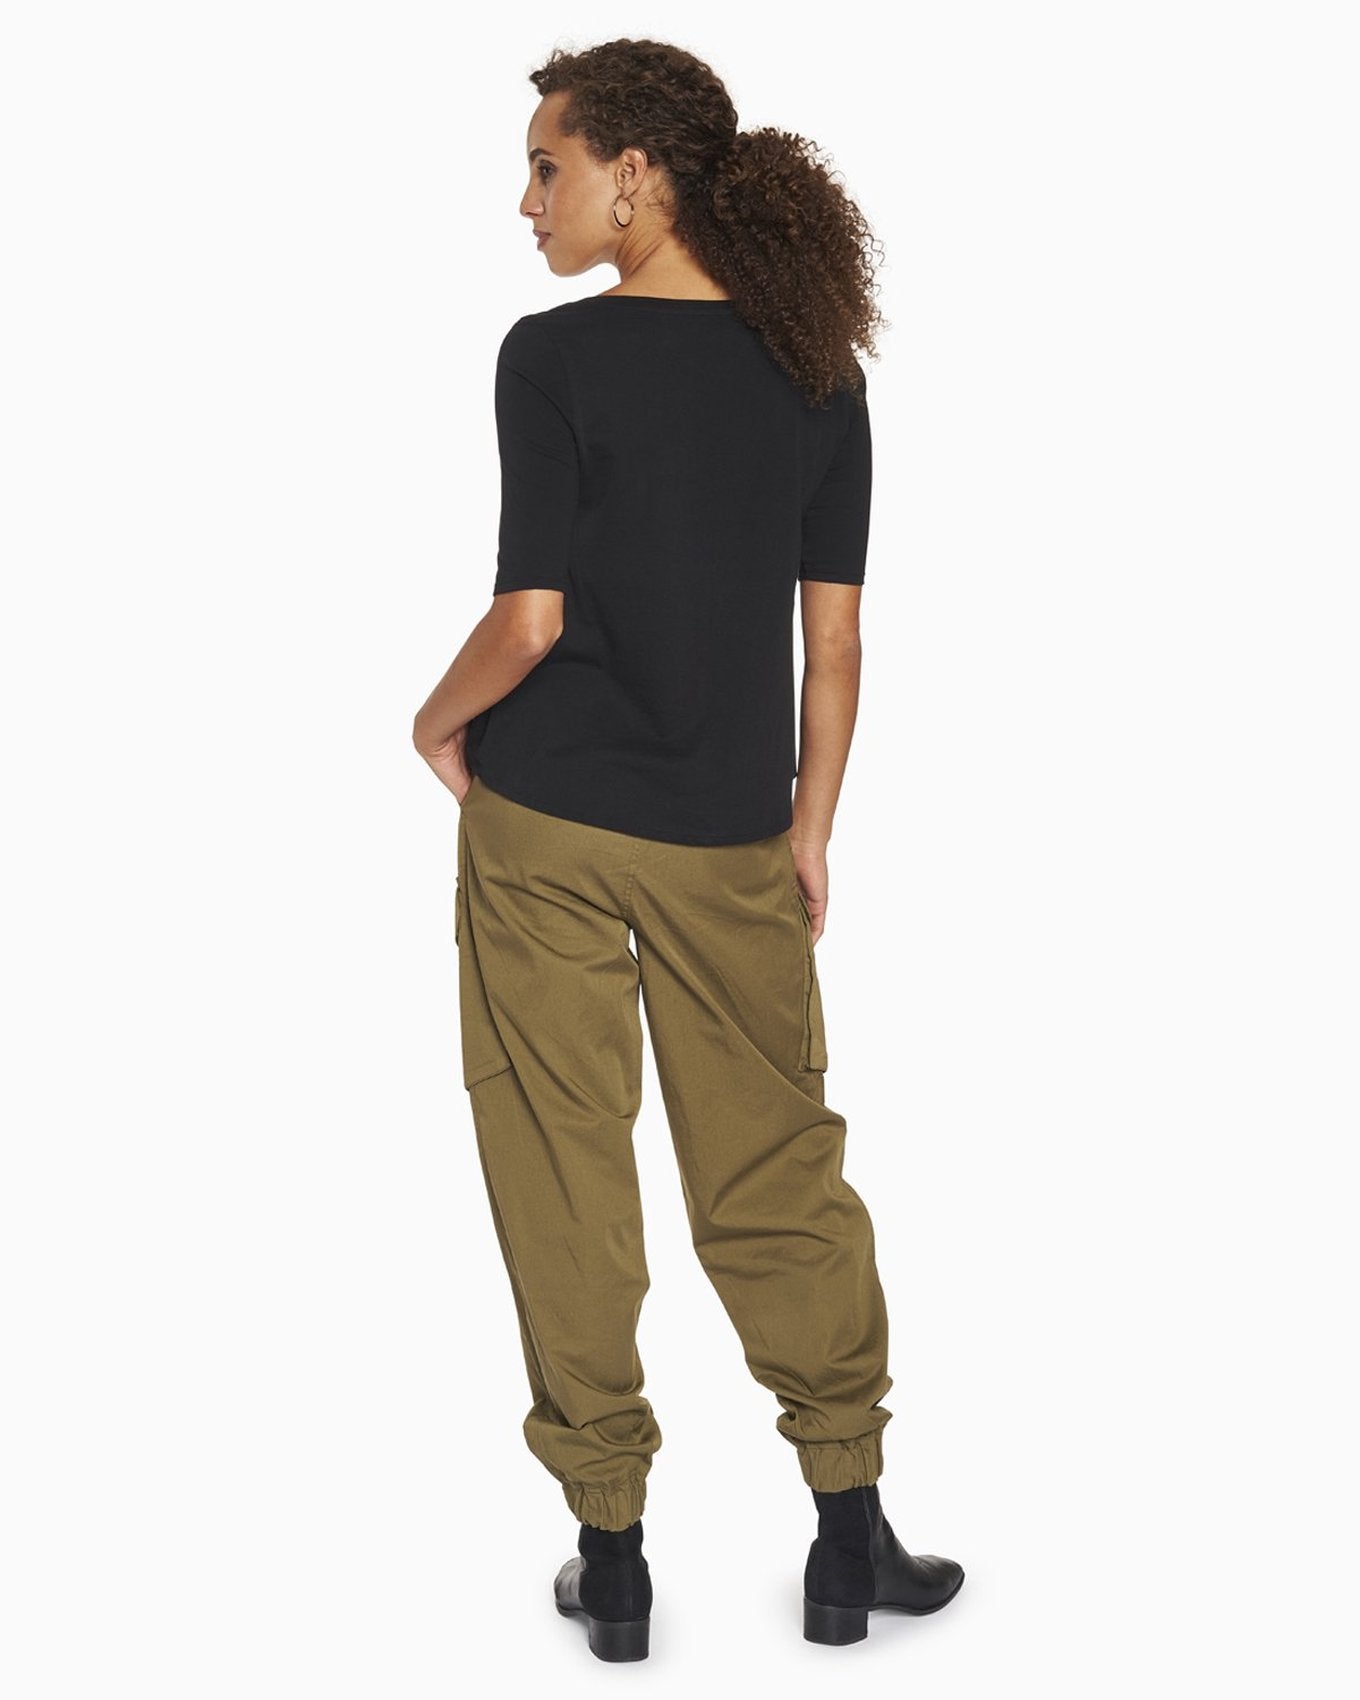 YesAnd Organic Utility Jogger Jogger in color Olive Branch and shape jogger/sweatpant